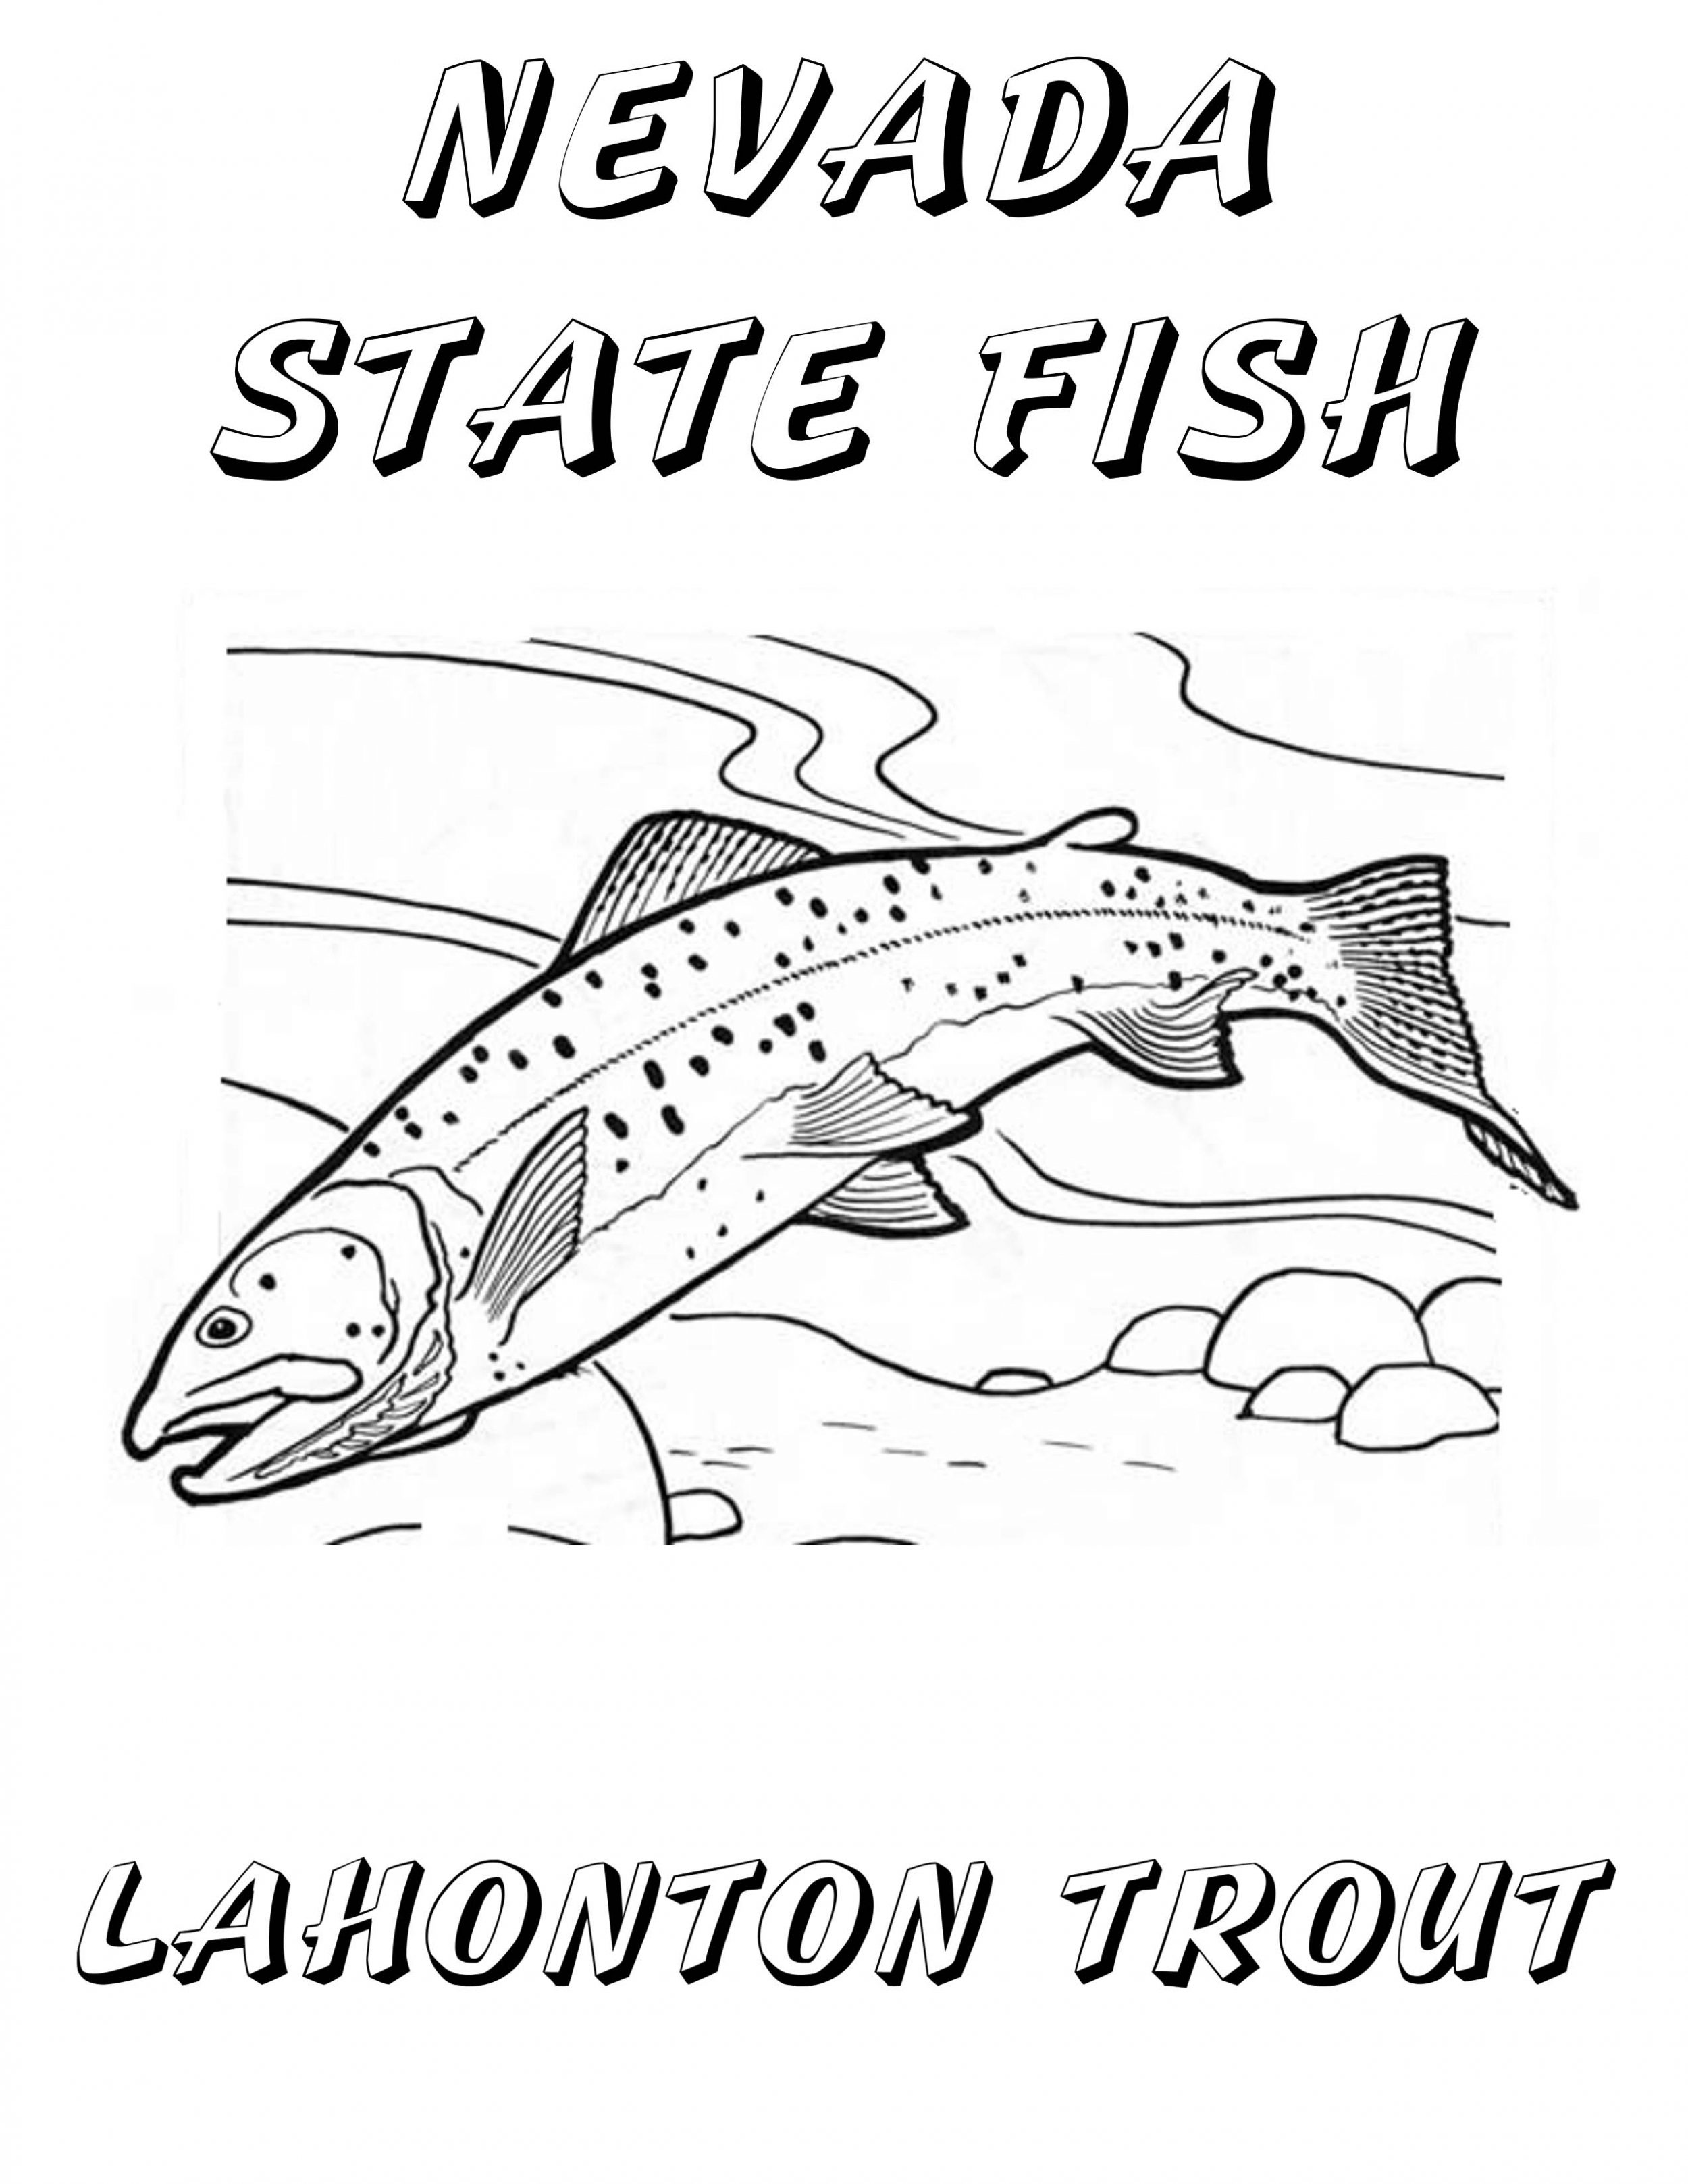 Nevada Day Coloring Book State Fish Lahontan Cutthroat Trout 2012 Copyright Christine Hull